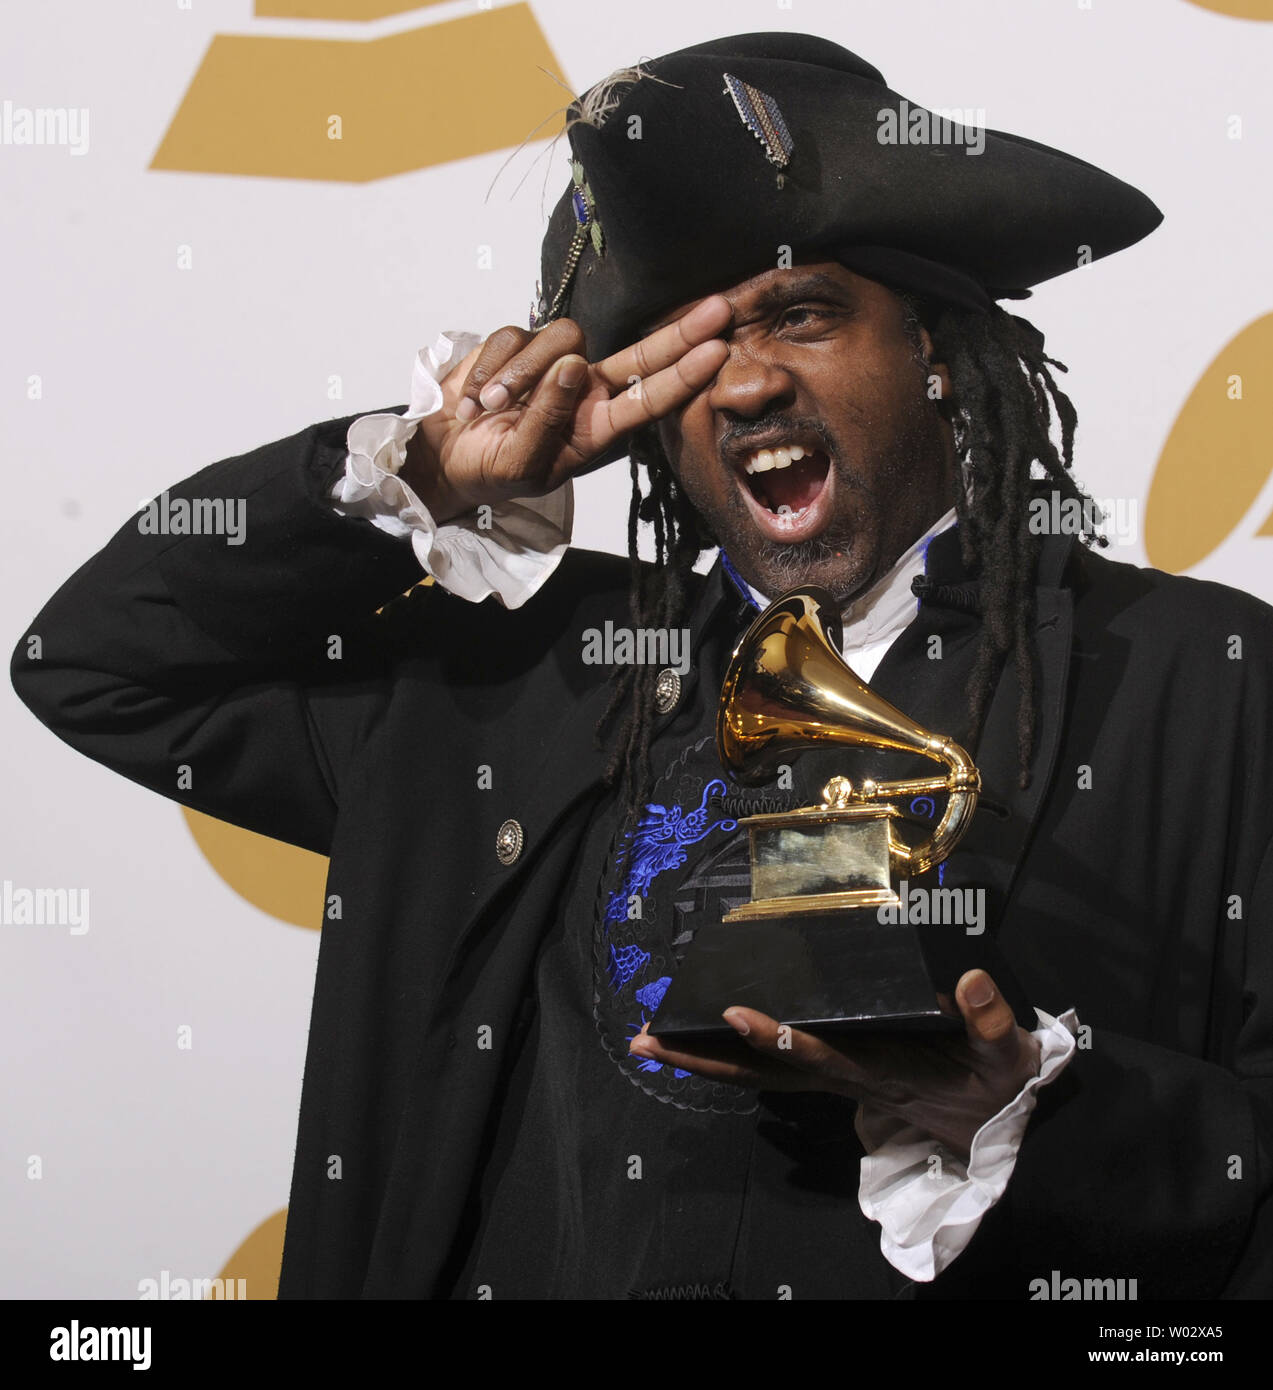 Future Man holds the Grammy Award for Best Best Pop Instrumental Album won by Bella Fleck & The Fleckstones for 'Jingle All The Way' at the 51st annual Grammy Awards at the Staples Center in Los Angeles on February 8, 2009.   UPI/Phil McCarten Stock Photo